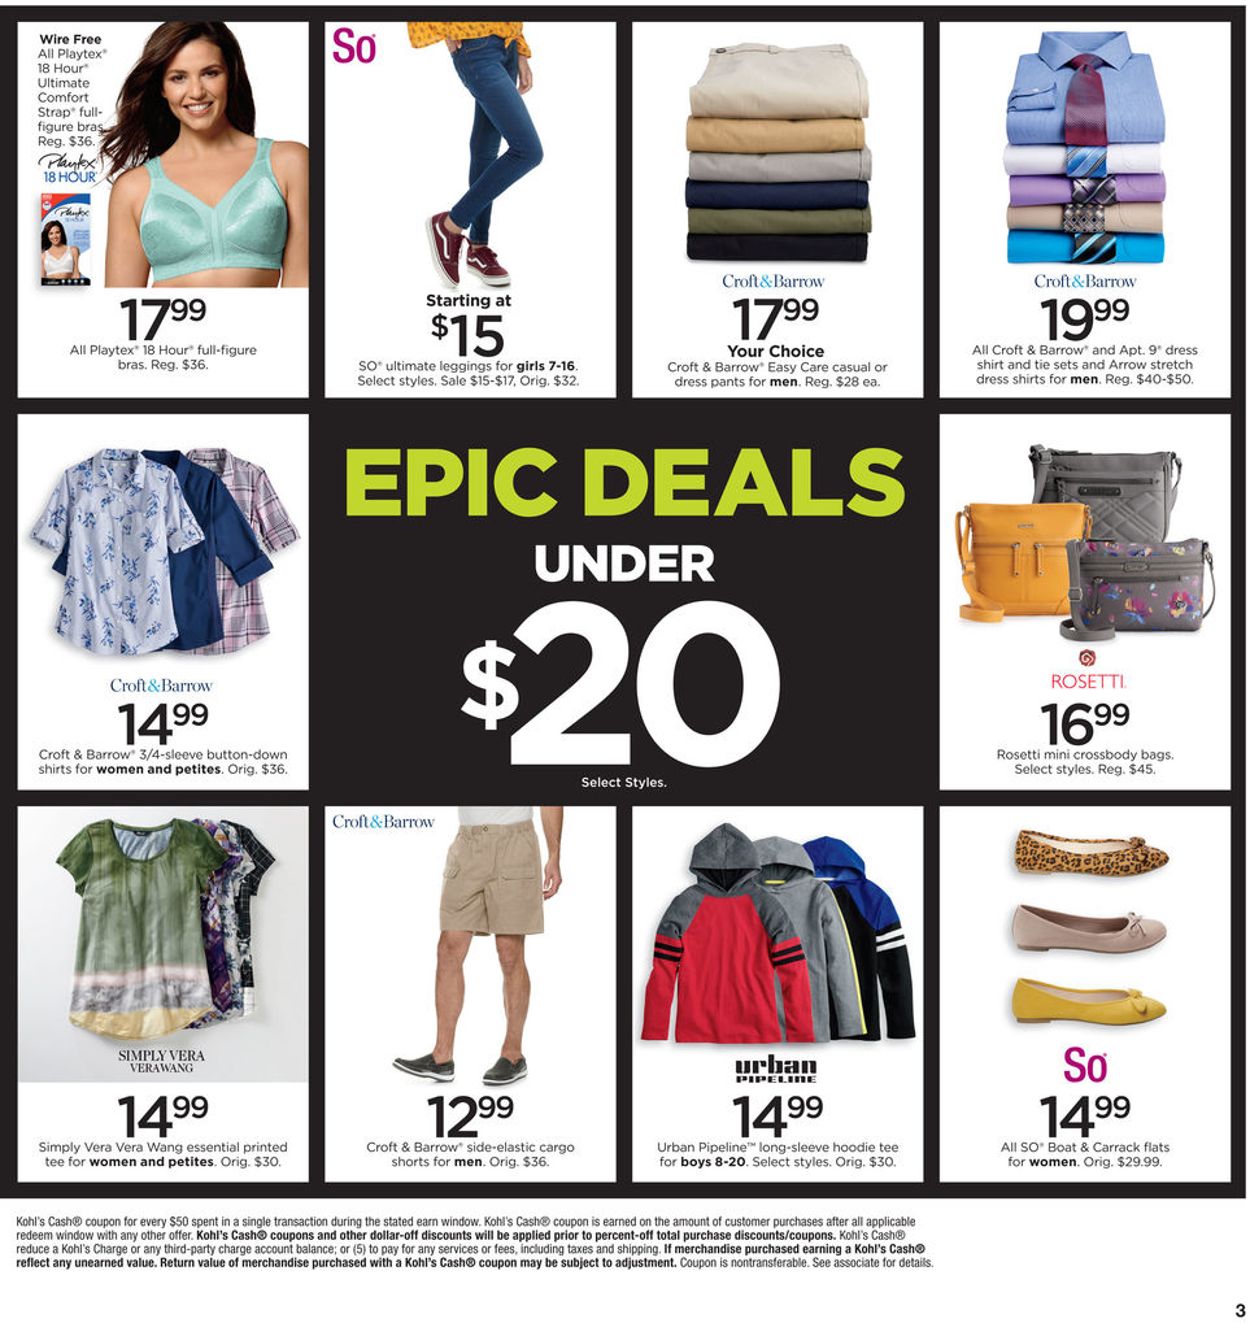 Kohl's Current weekly ad 09/04 - 09/08/2019 [3] - frequent-ads.com